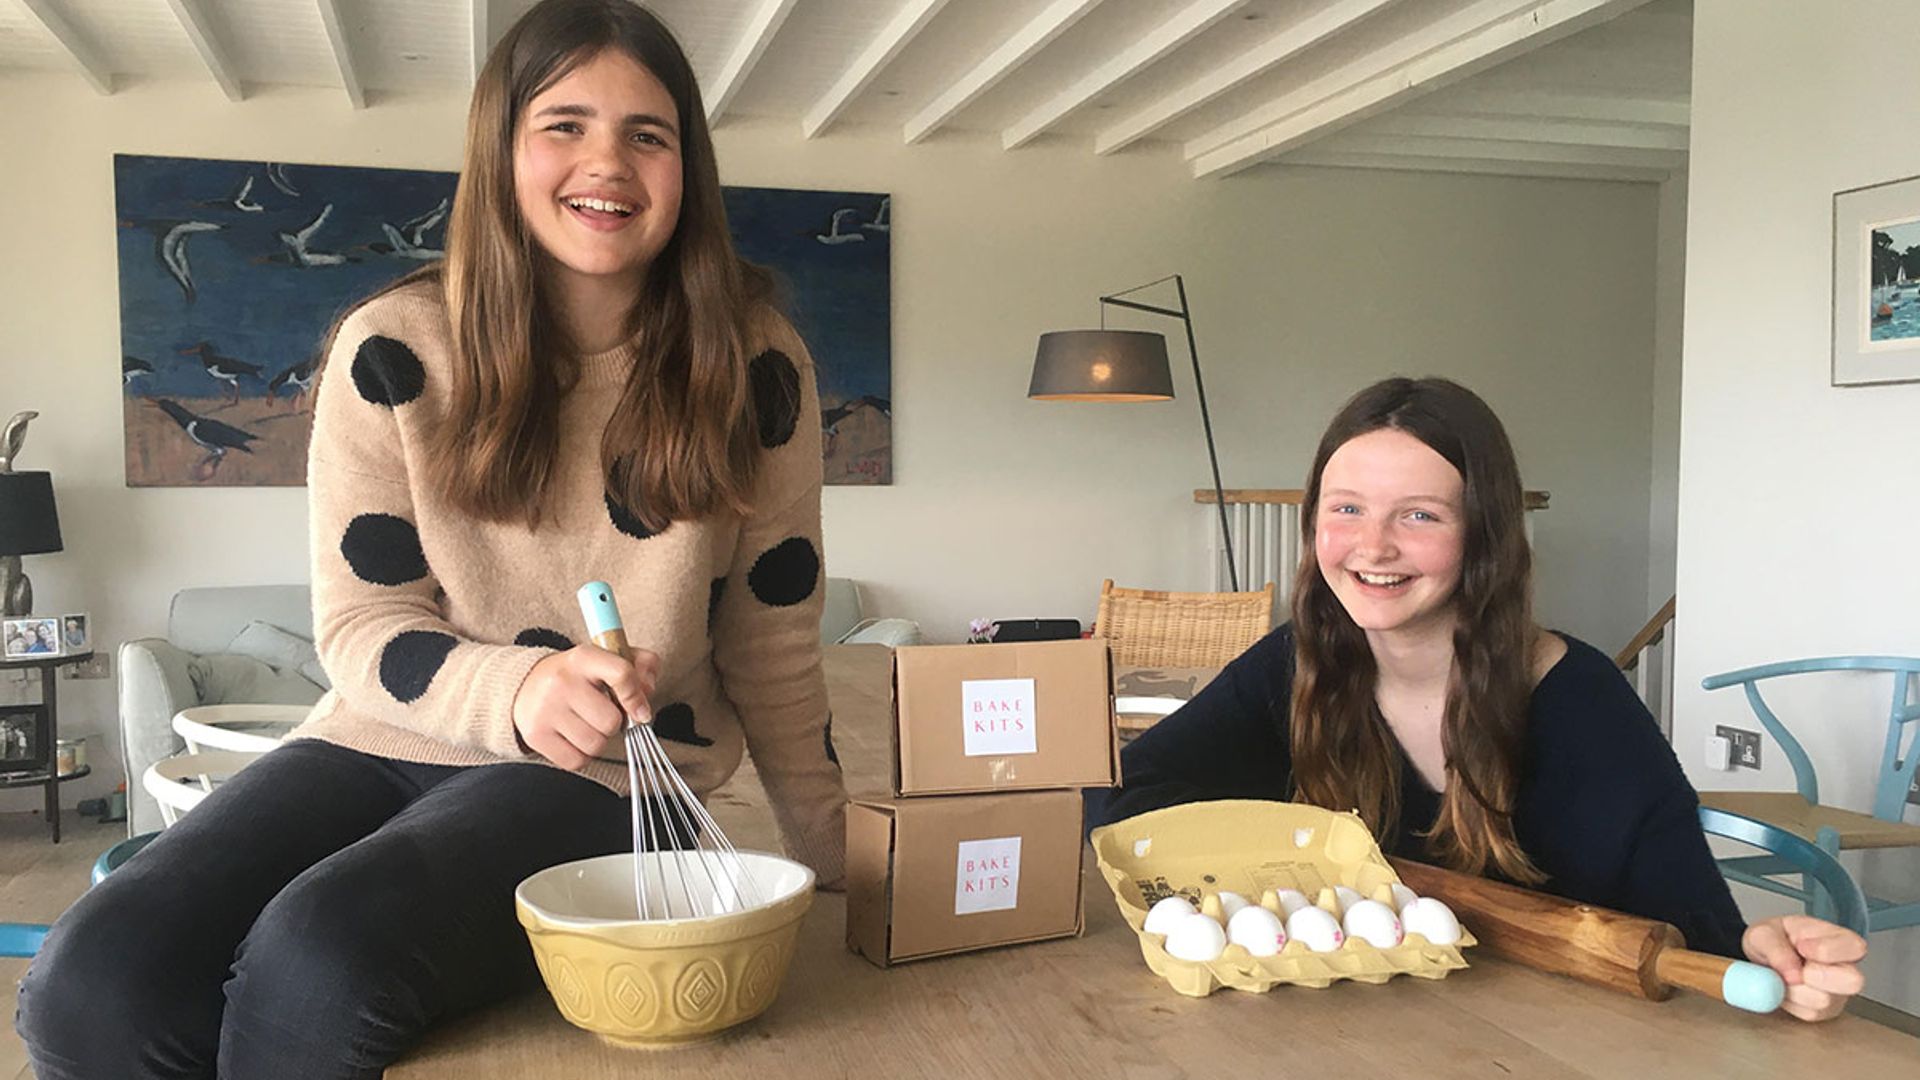 These 13-year-olds are raising money for the NHS by selling Bake Kits - and Bake Off's Nadiya inspired them